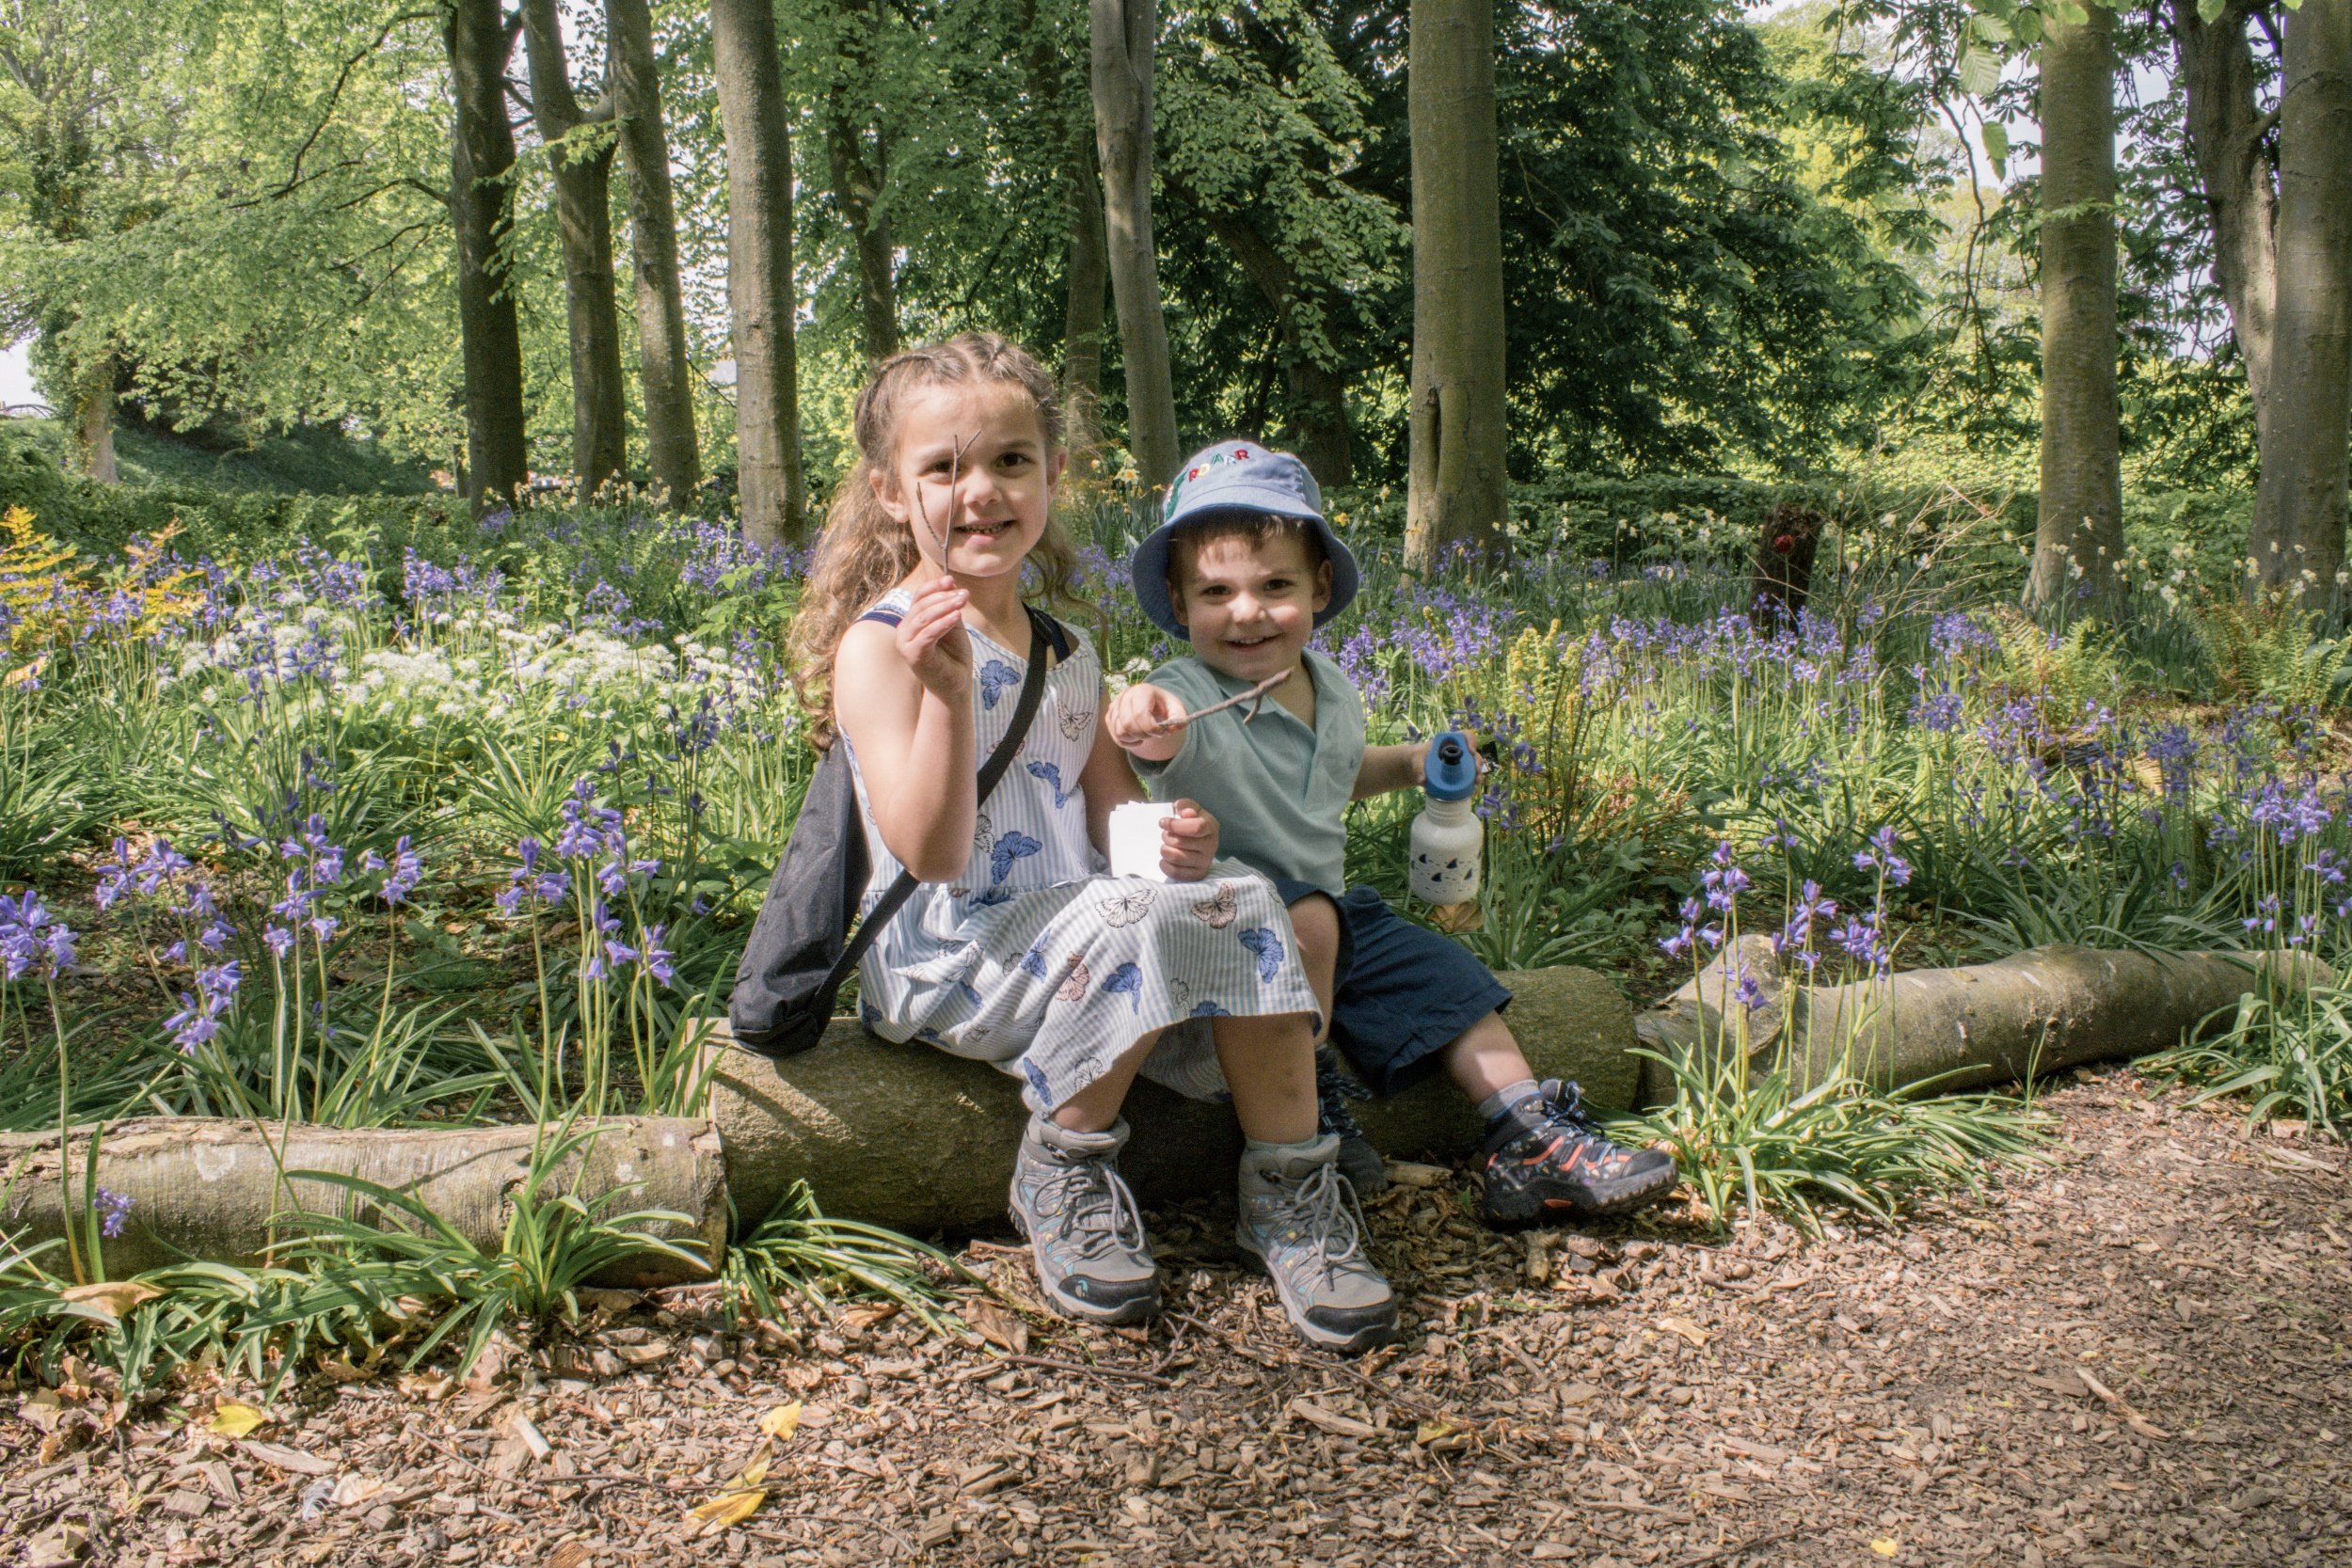 Pickle and Munchkin with bluebells